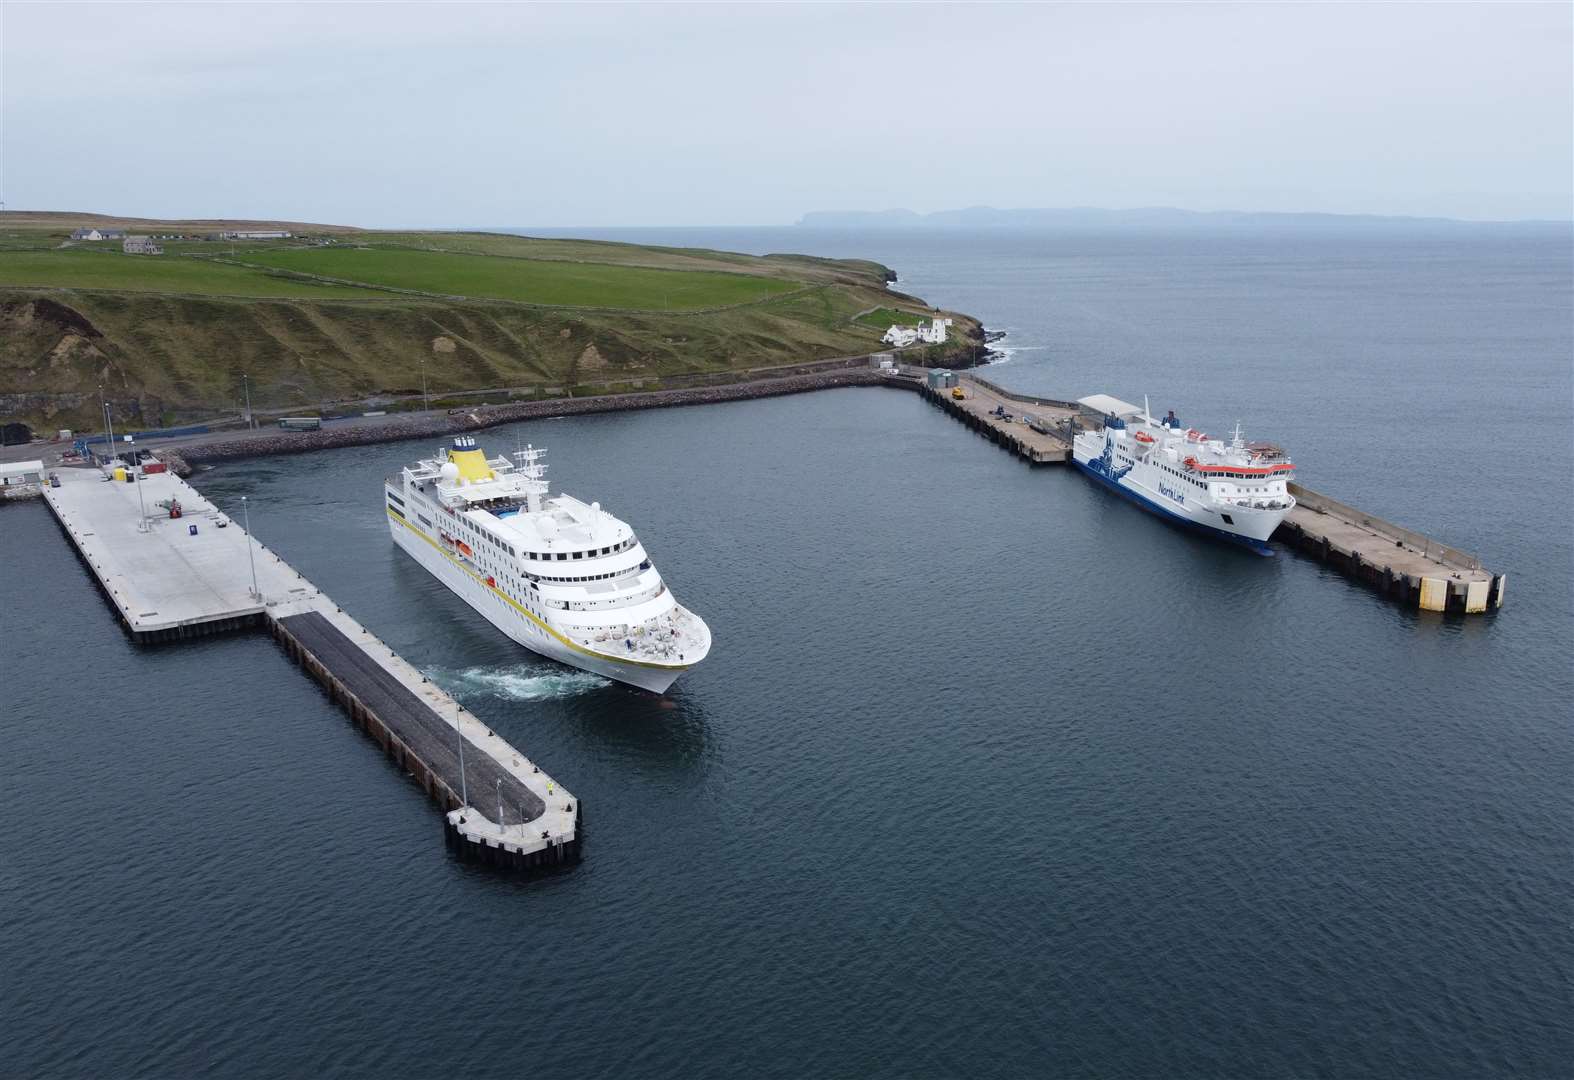 The cruise ship MS Hamburg alongside the NorthLink ferry at Scrabster harbour.